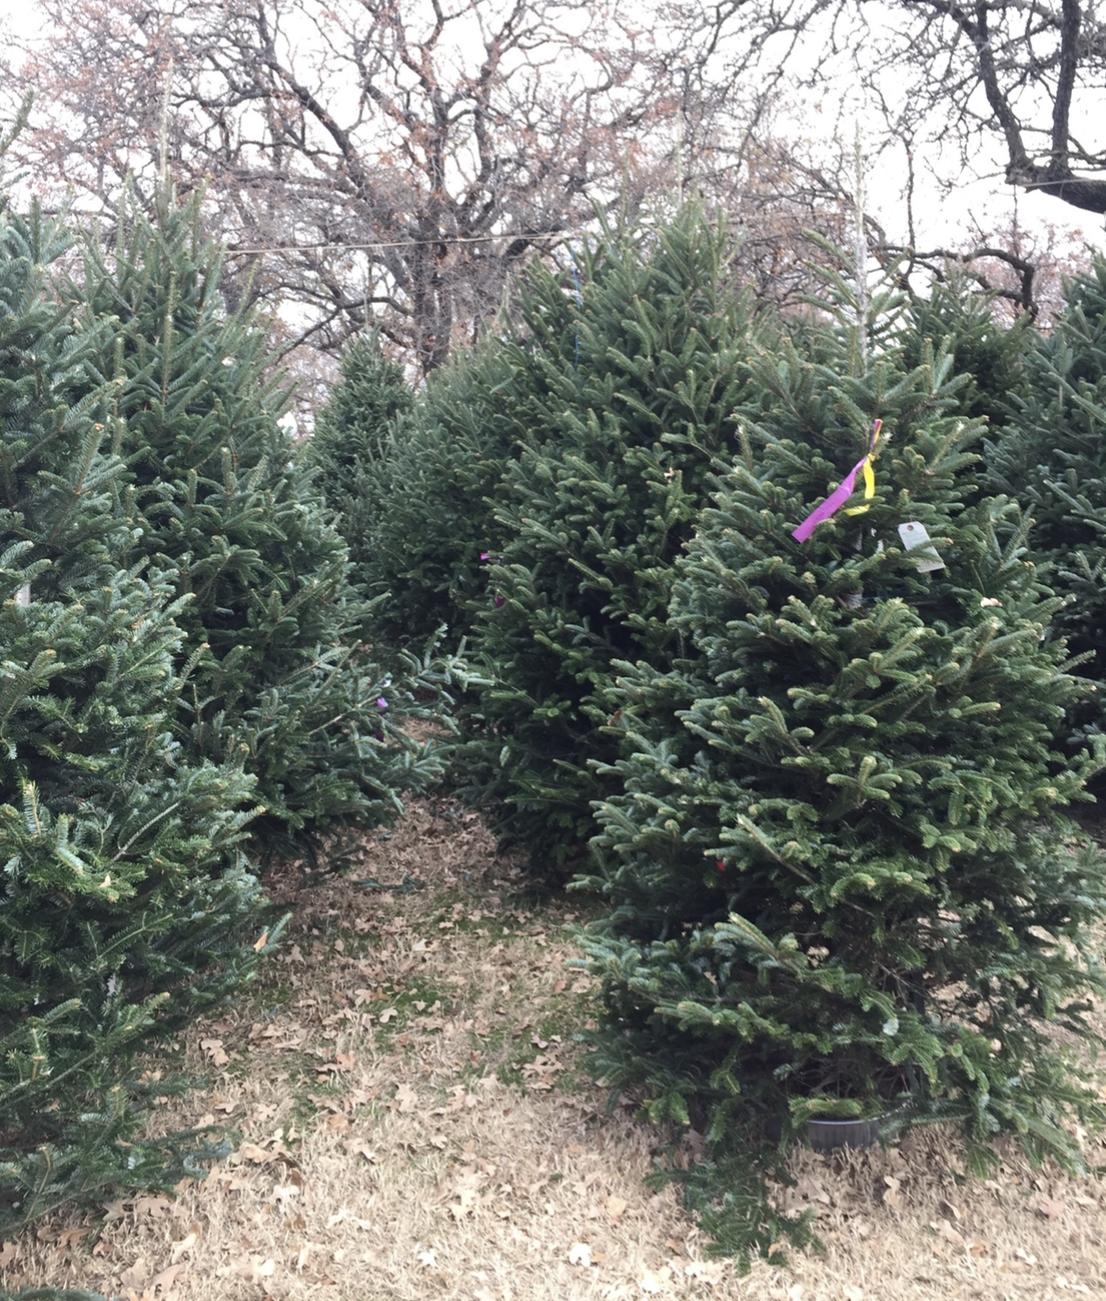 Rows of Christmas trees available at the Haynie's Green Acres farm in 2021